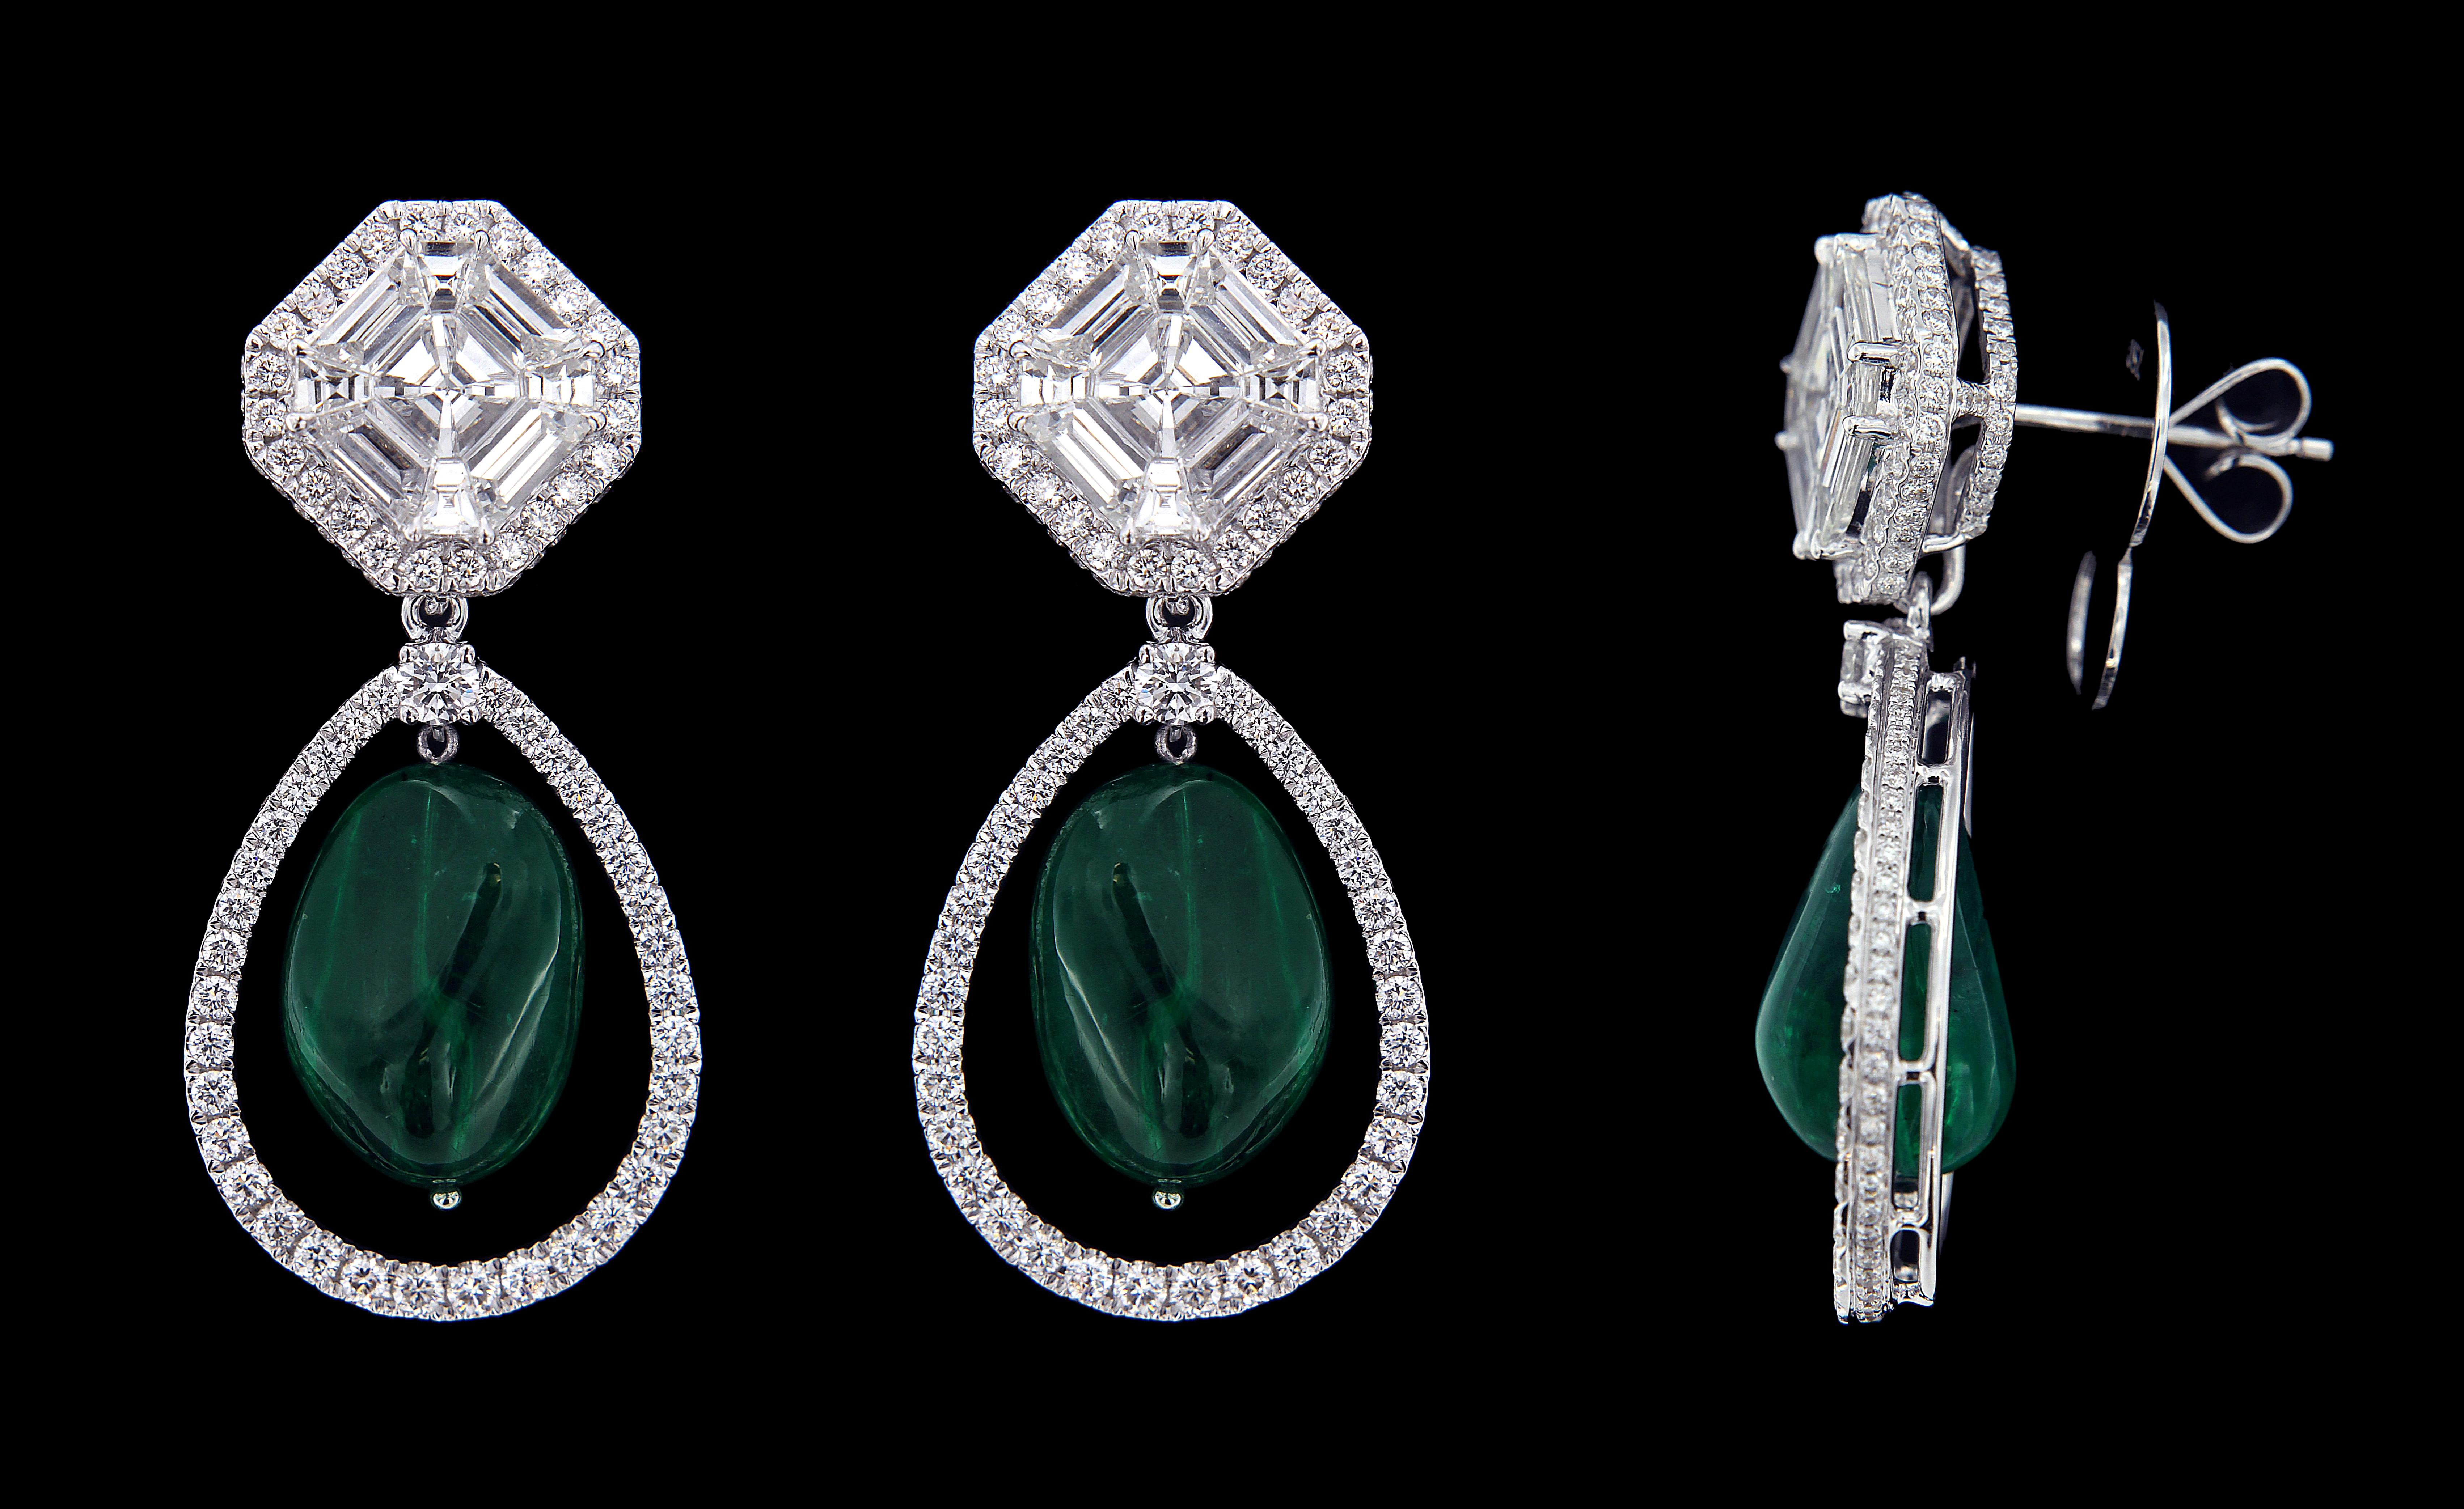 Exquisite 18 karat White Gold,  Diamond And Drop Emerald Earring .

Earrings:
Diamonds of approximately 5.373carats, emerald approximately of 18.300carats mounted on 18 karat white gold earring. The earring weighs approximately around